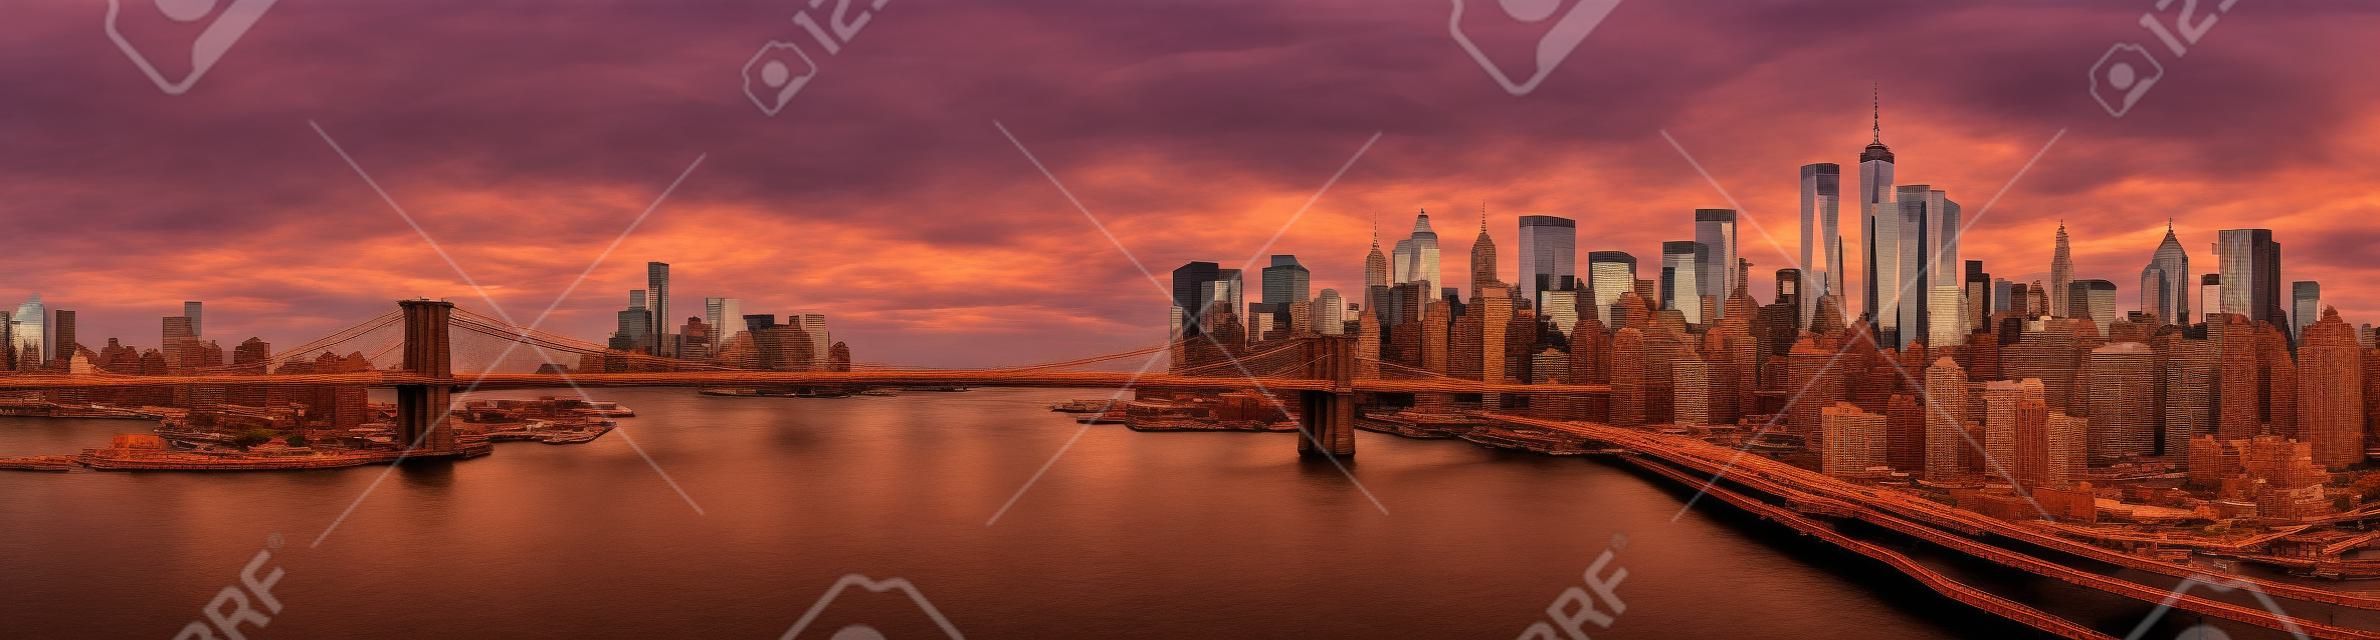 Brooklyn Bridge panorama at sunset. The iconic landmark spans between Brooklyn and the New York Financial District skyline, dominated by the Freedom Tower.